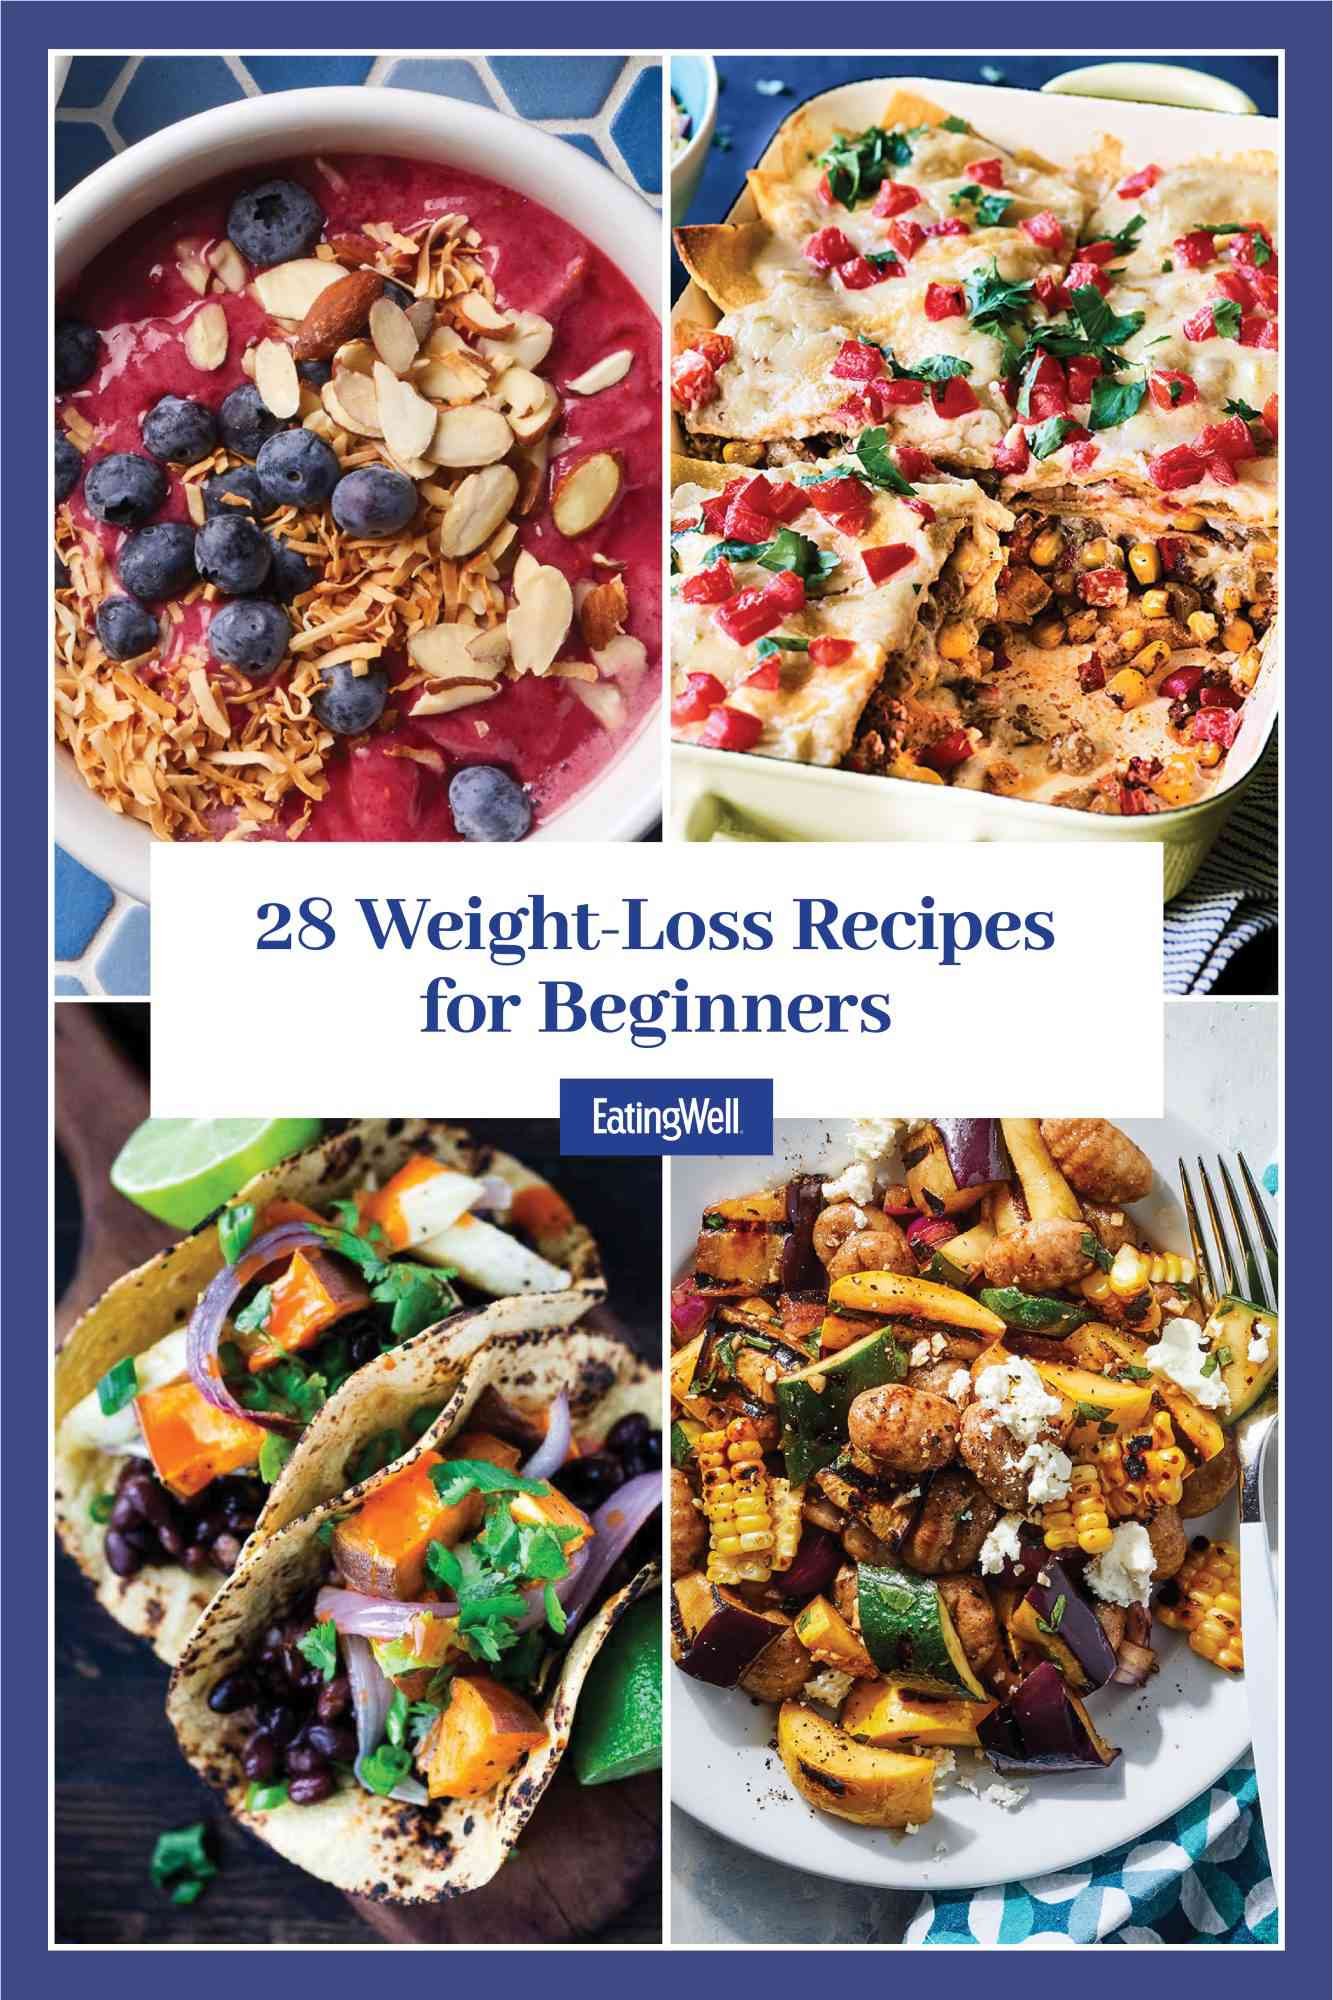 Low-Calorie Recipes for Weight Loss